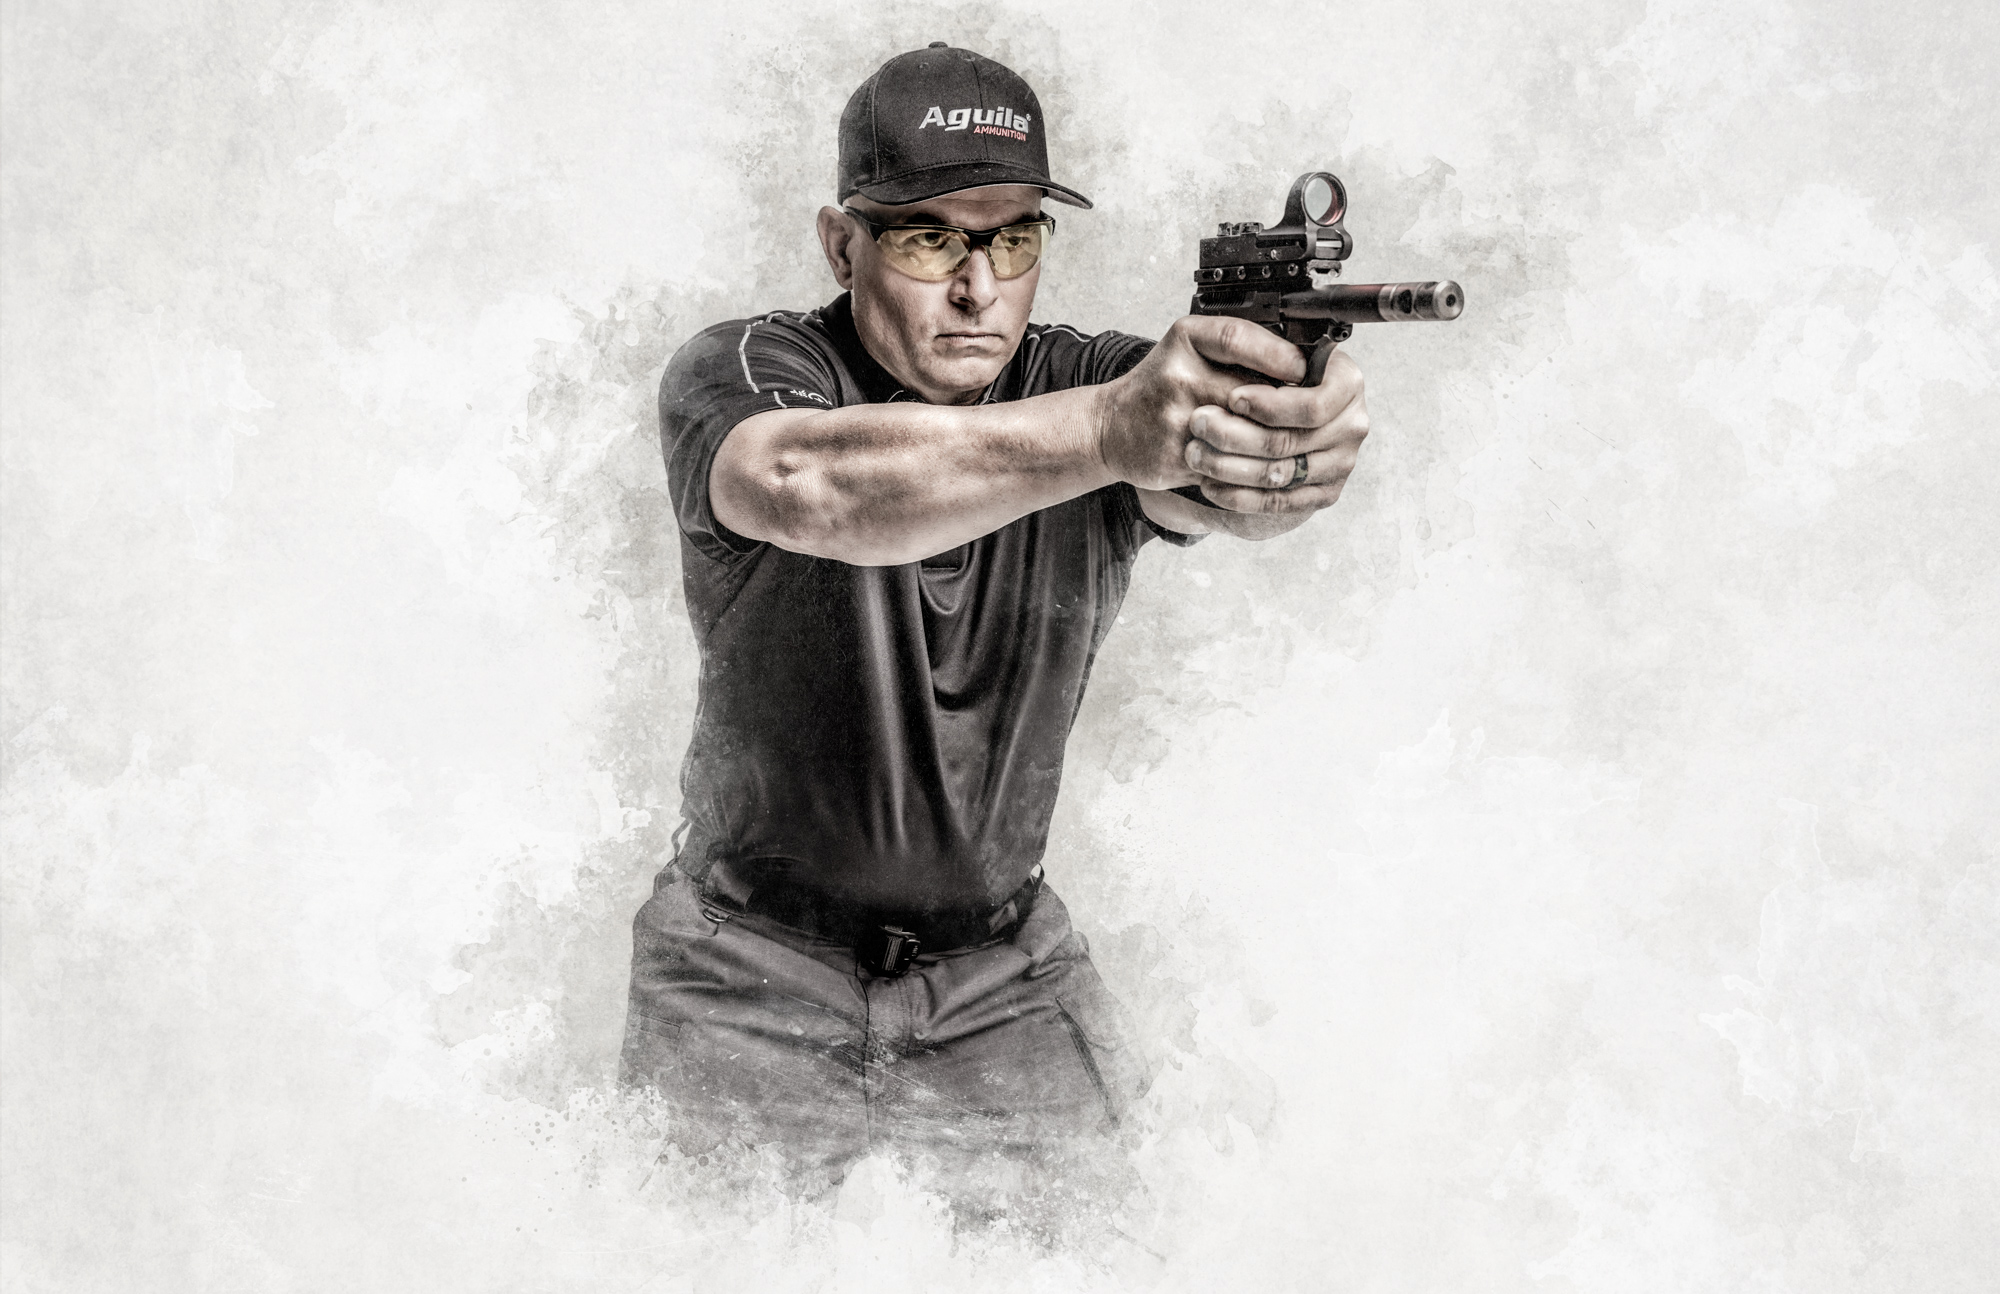 Aguila_RimfireCompetition_CB-03merged